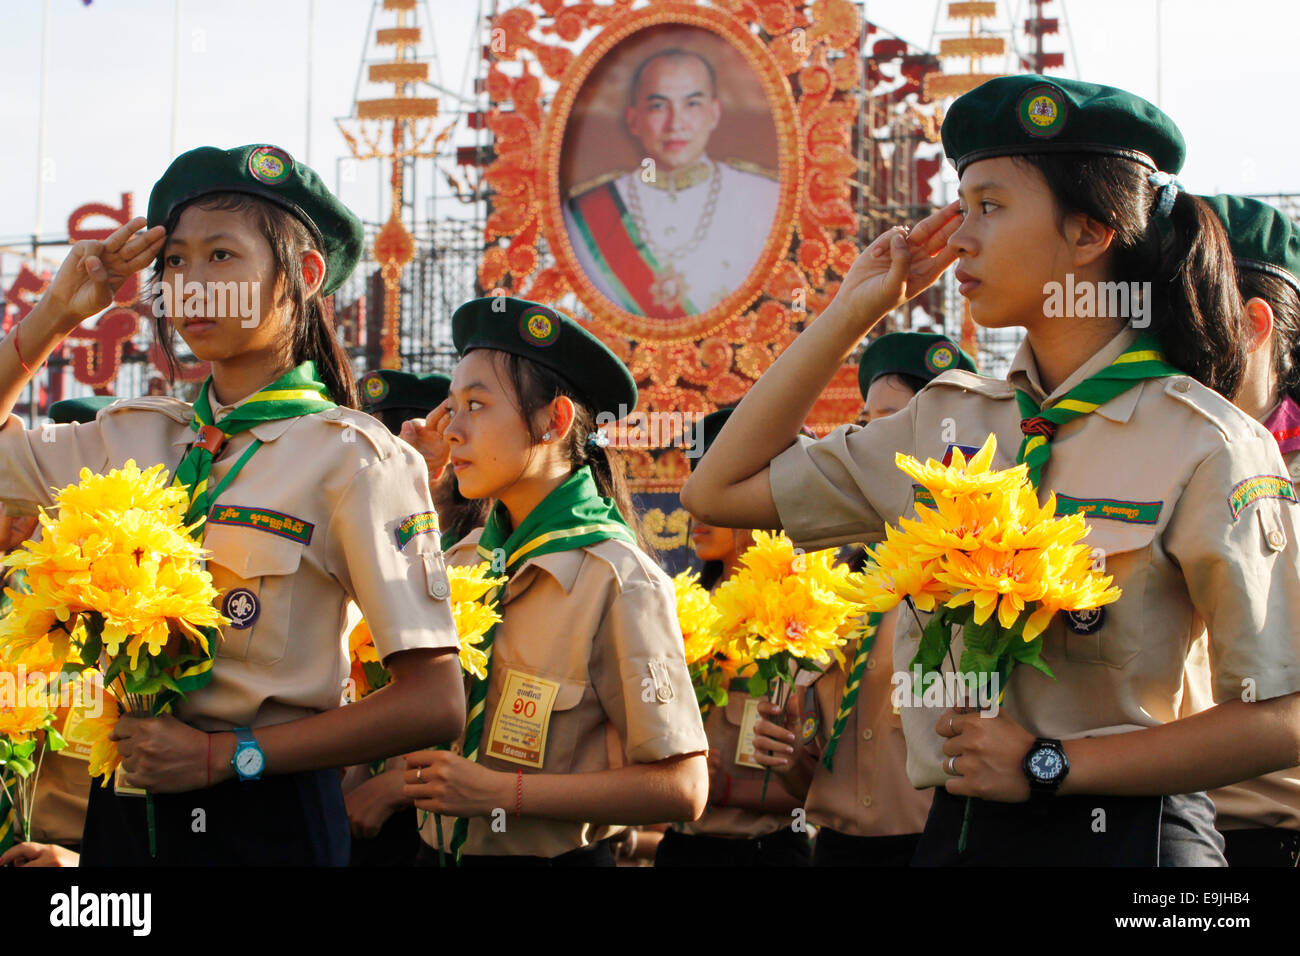 Phnom Penh. 29th Oct, 2014. A group of Scouts salute during the celebration for the 10th anniversary of Cambodian King Norodom Sihamoni's coronation in Phnom Penh Oct. 29, 2014. Cambodia on Wednesday celebrated the 10th anniversary of King Norodom Sihamoni's coronation, urging people to continue uniting for national peace and development. Credit:  Sovannara/Xinhua/Alamy Live News Stock Photo